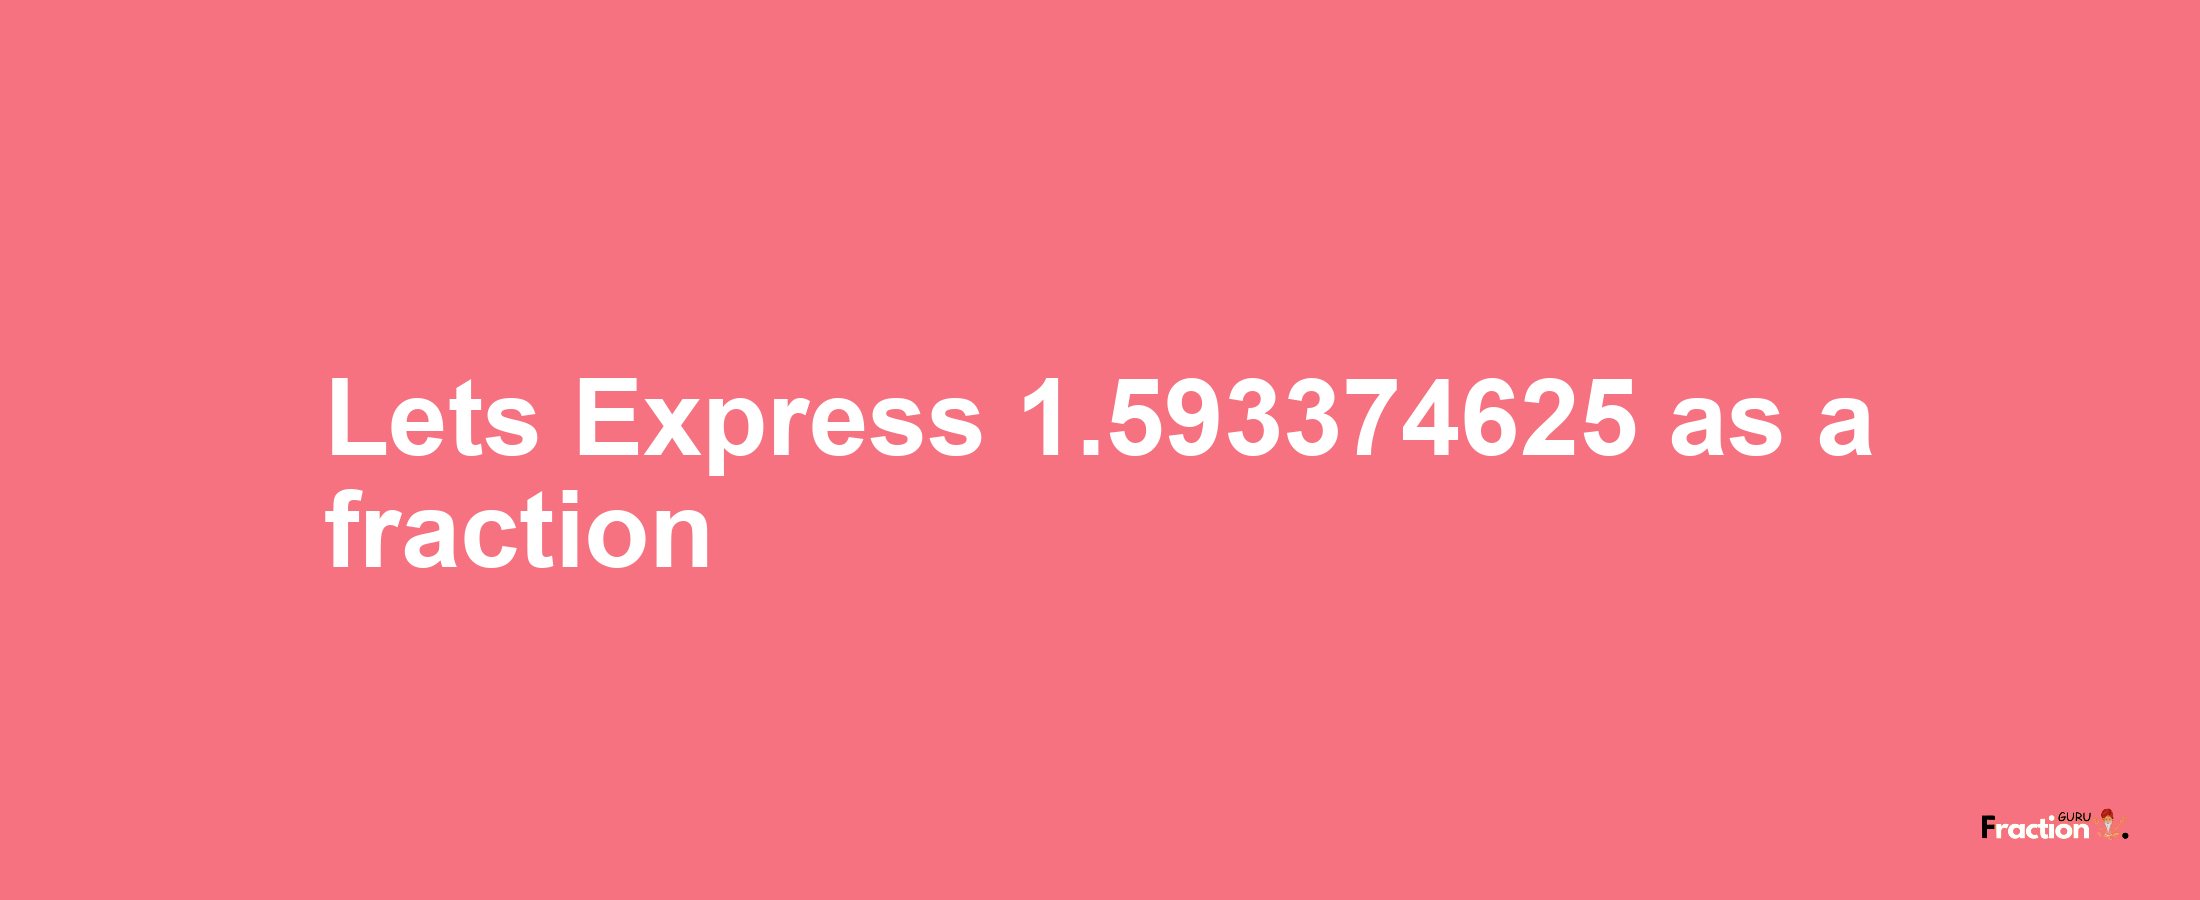 Lets Express 1.593374625 as afraction